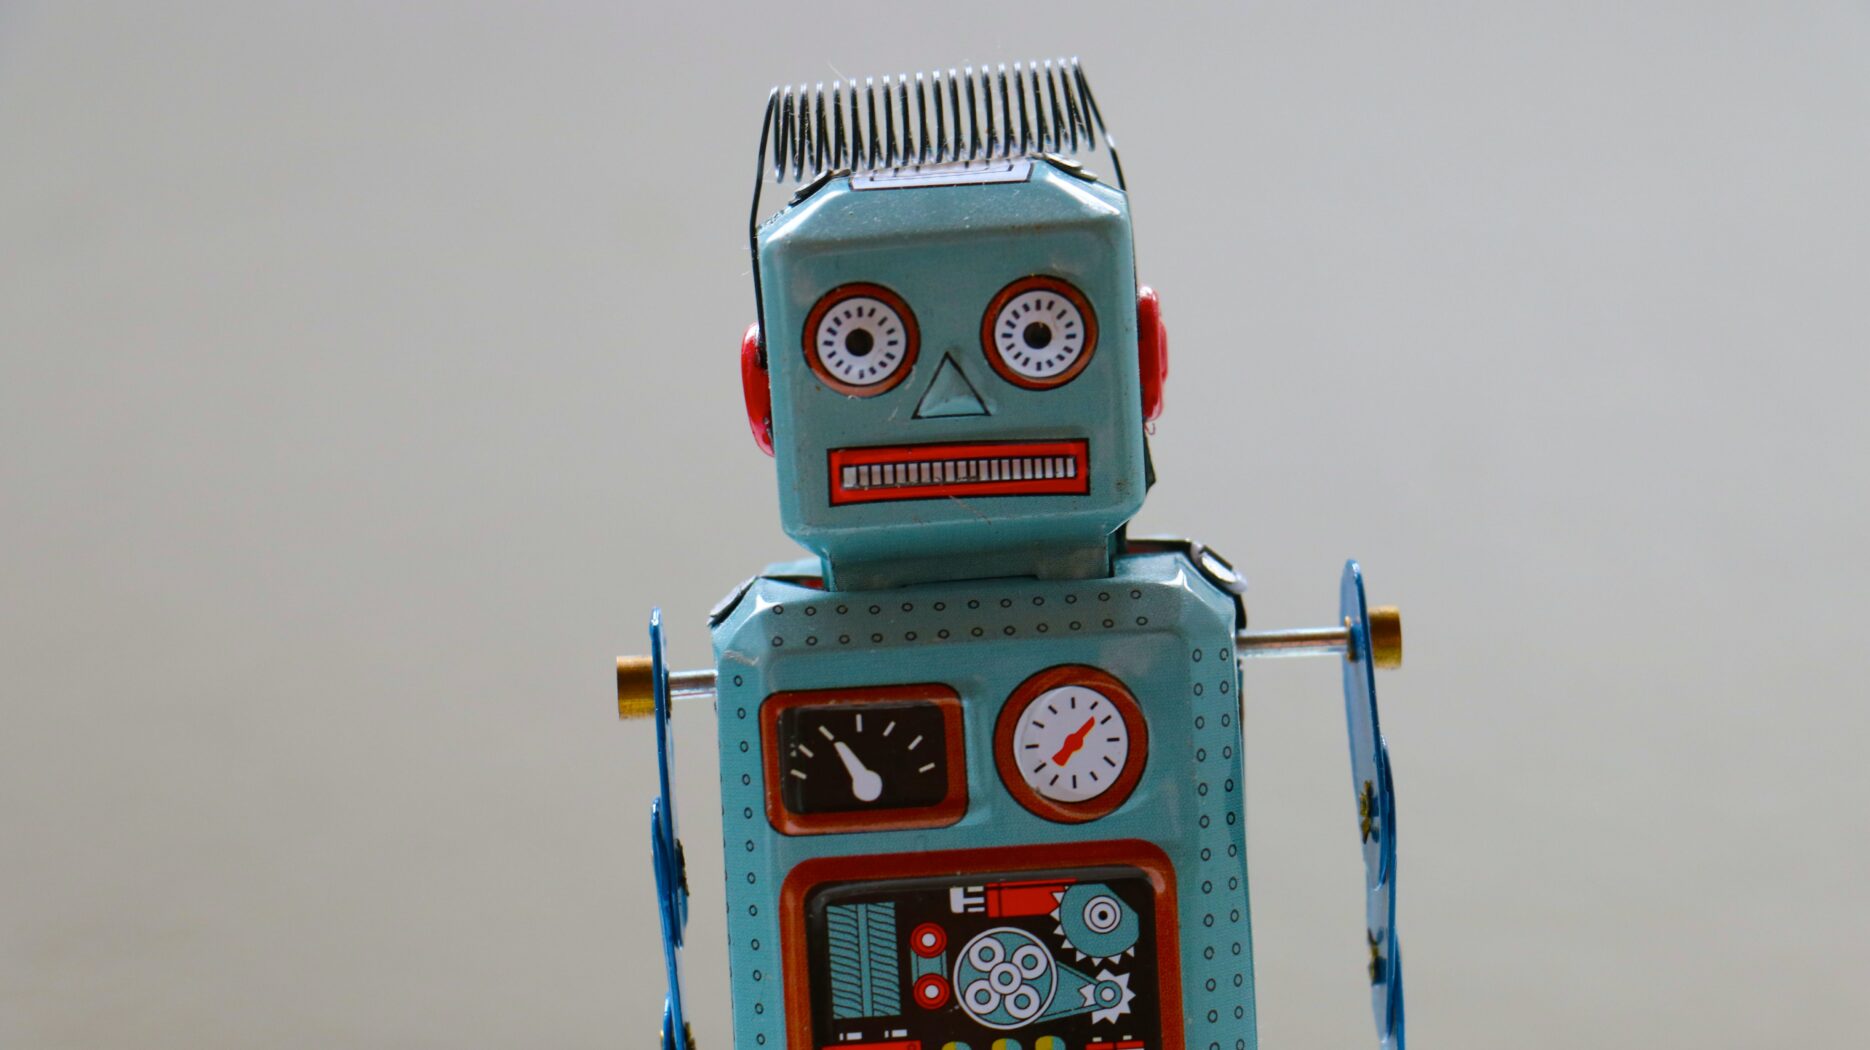 A 60s-style tin robot toy with a confused look on his face peers into the camera.